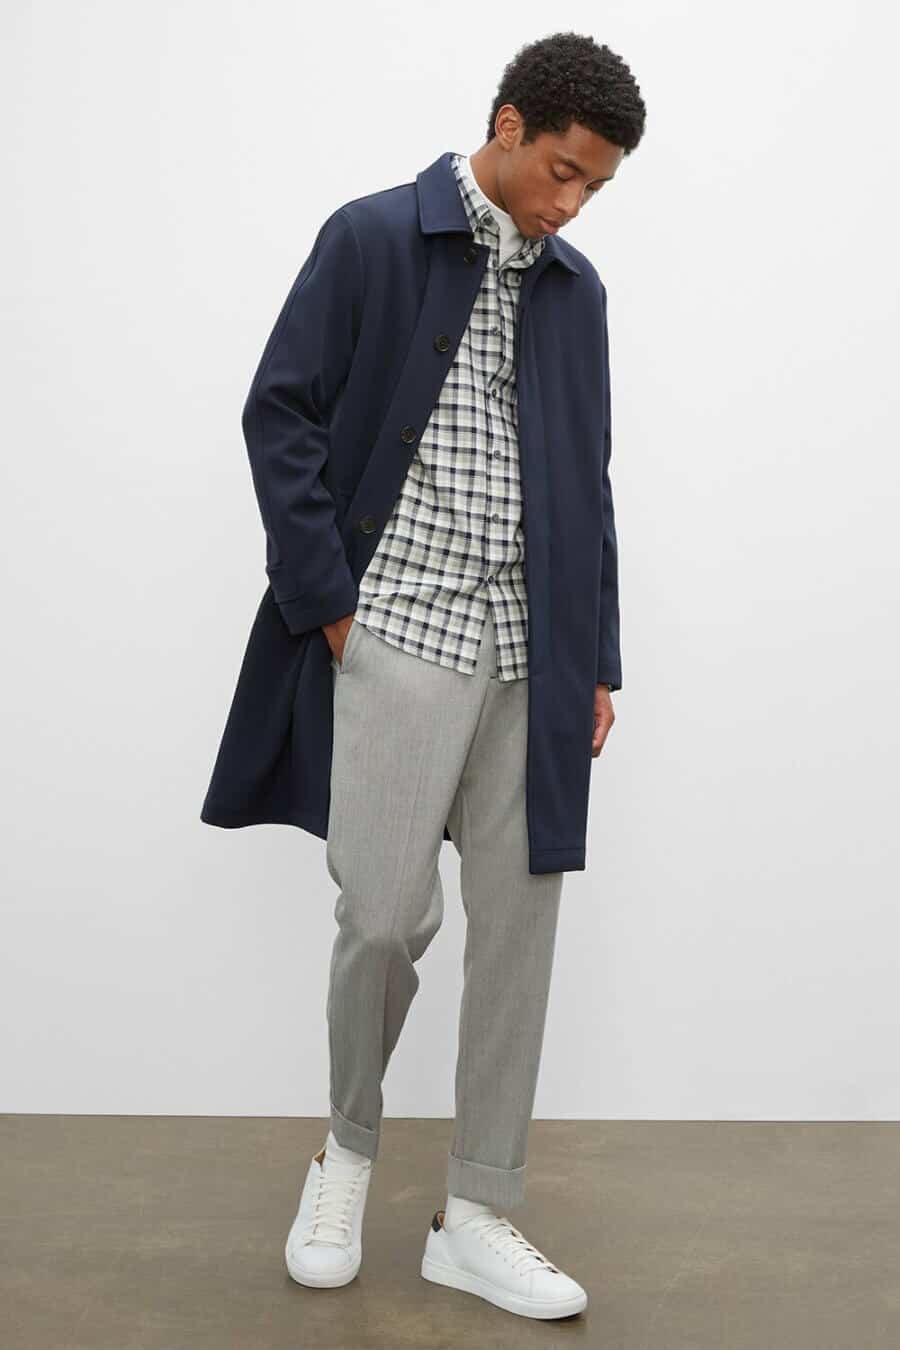 Men's spring flannel shirt outfit with grey chinos and lightweight rain coat